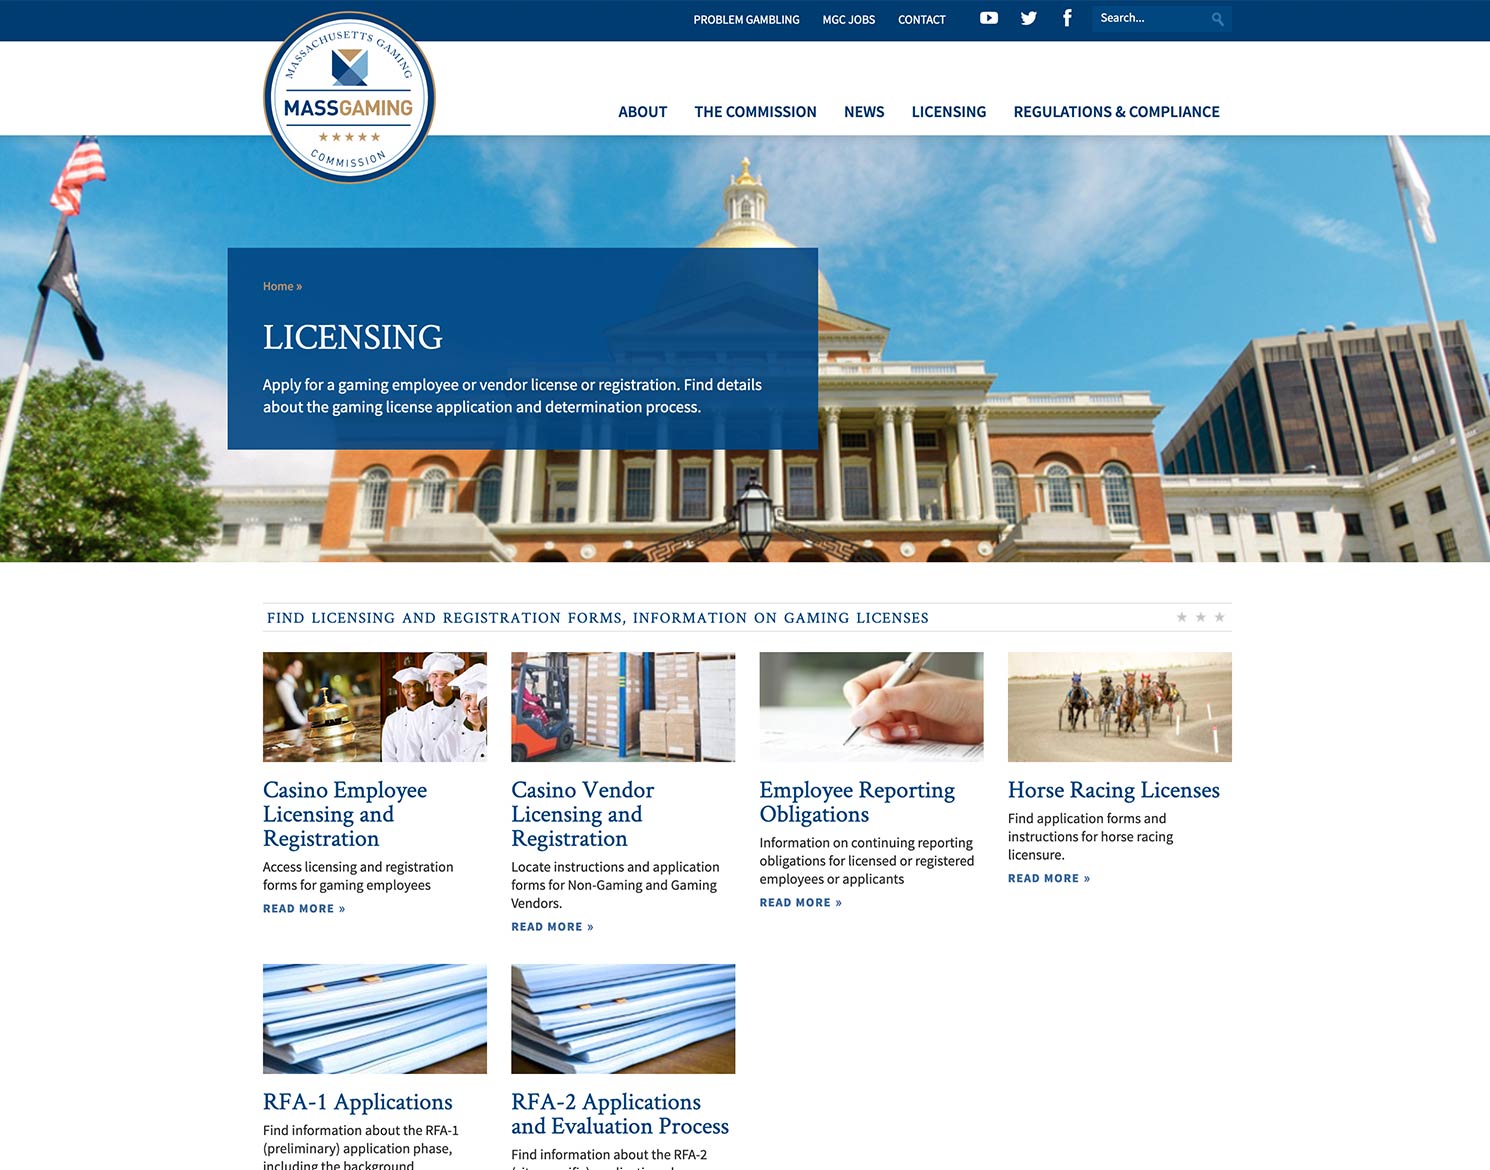 Massachusetts Gaming Commission website - Licensing page